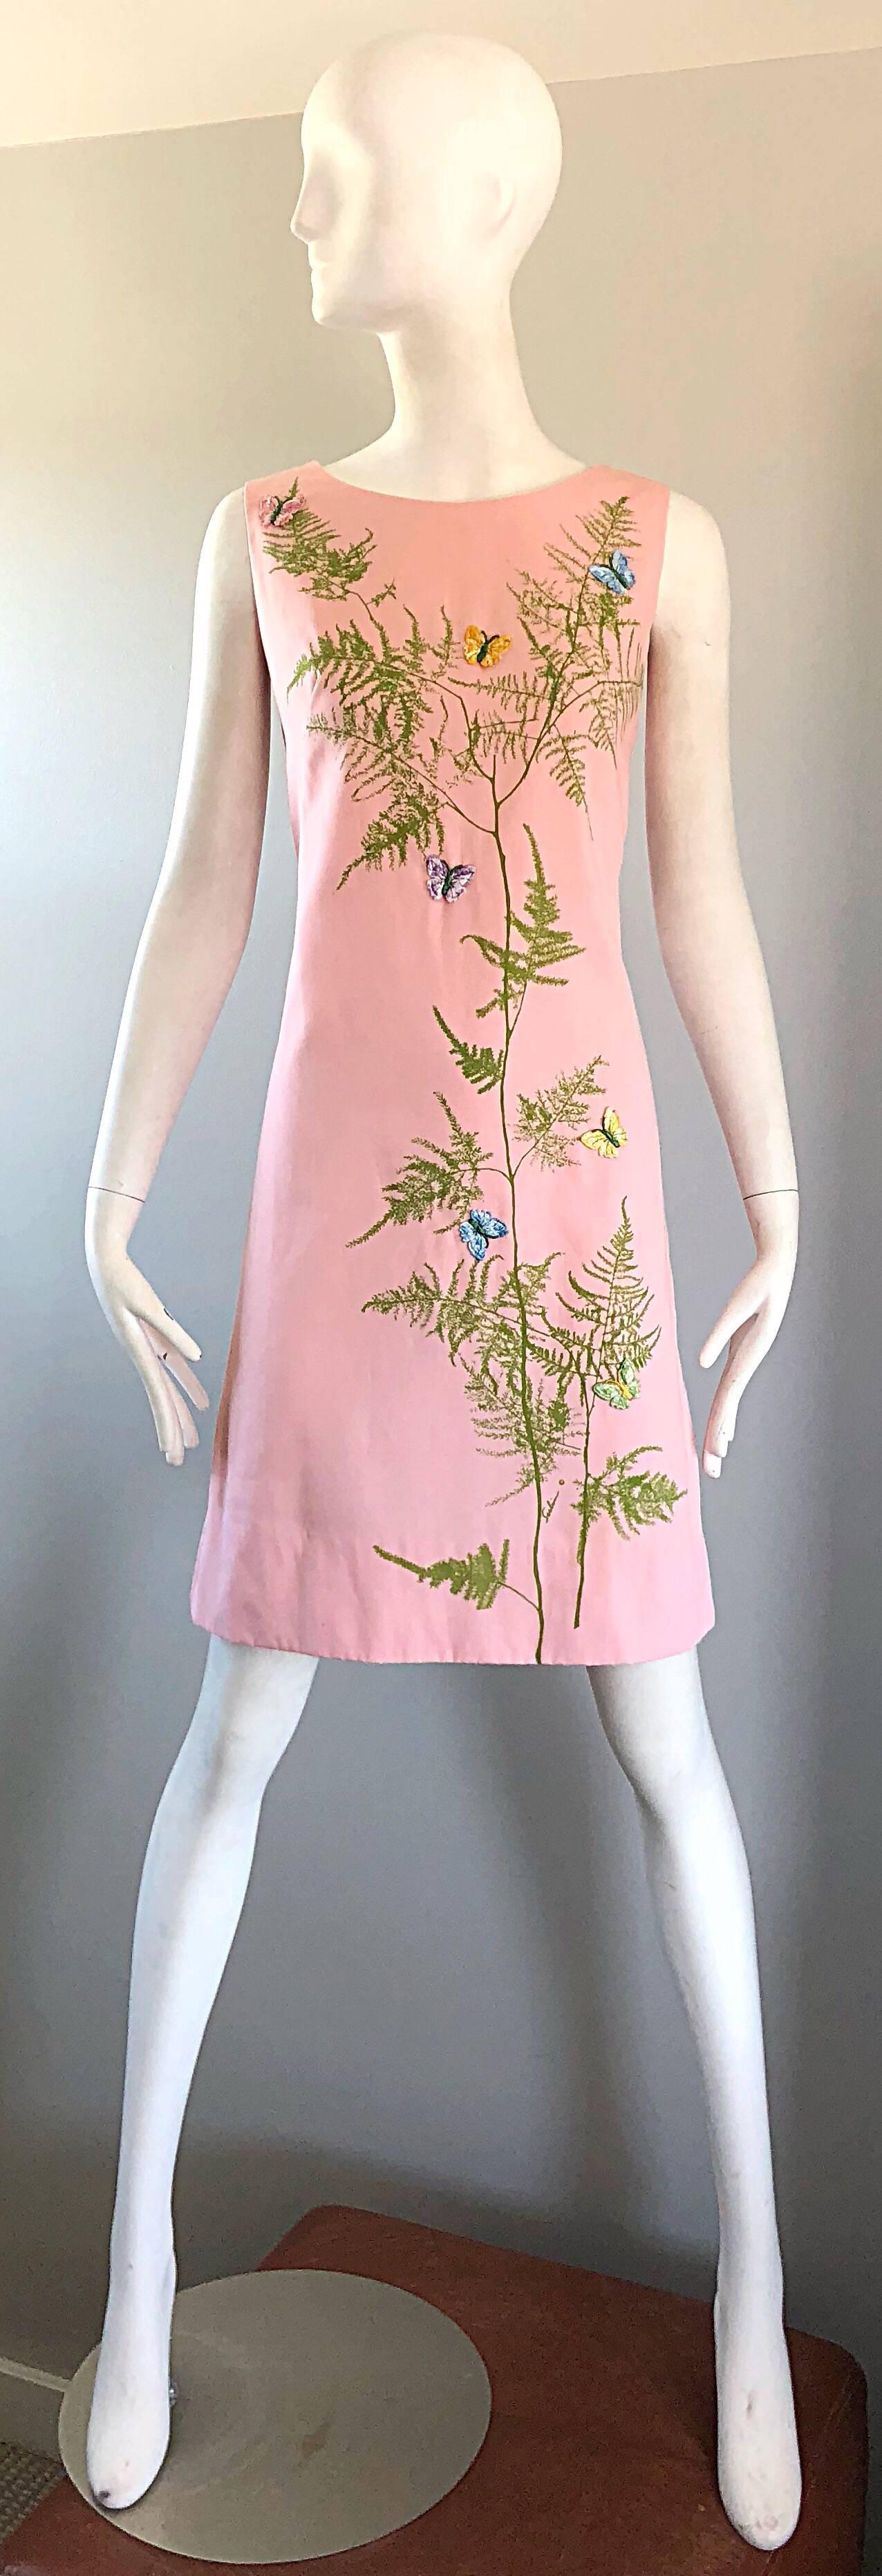 embrodiered dress